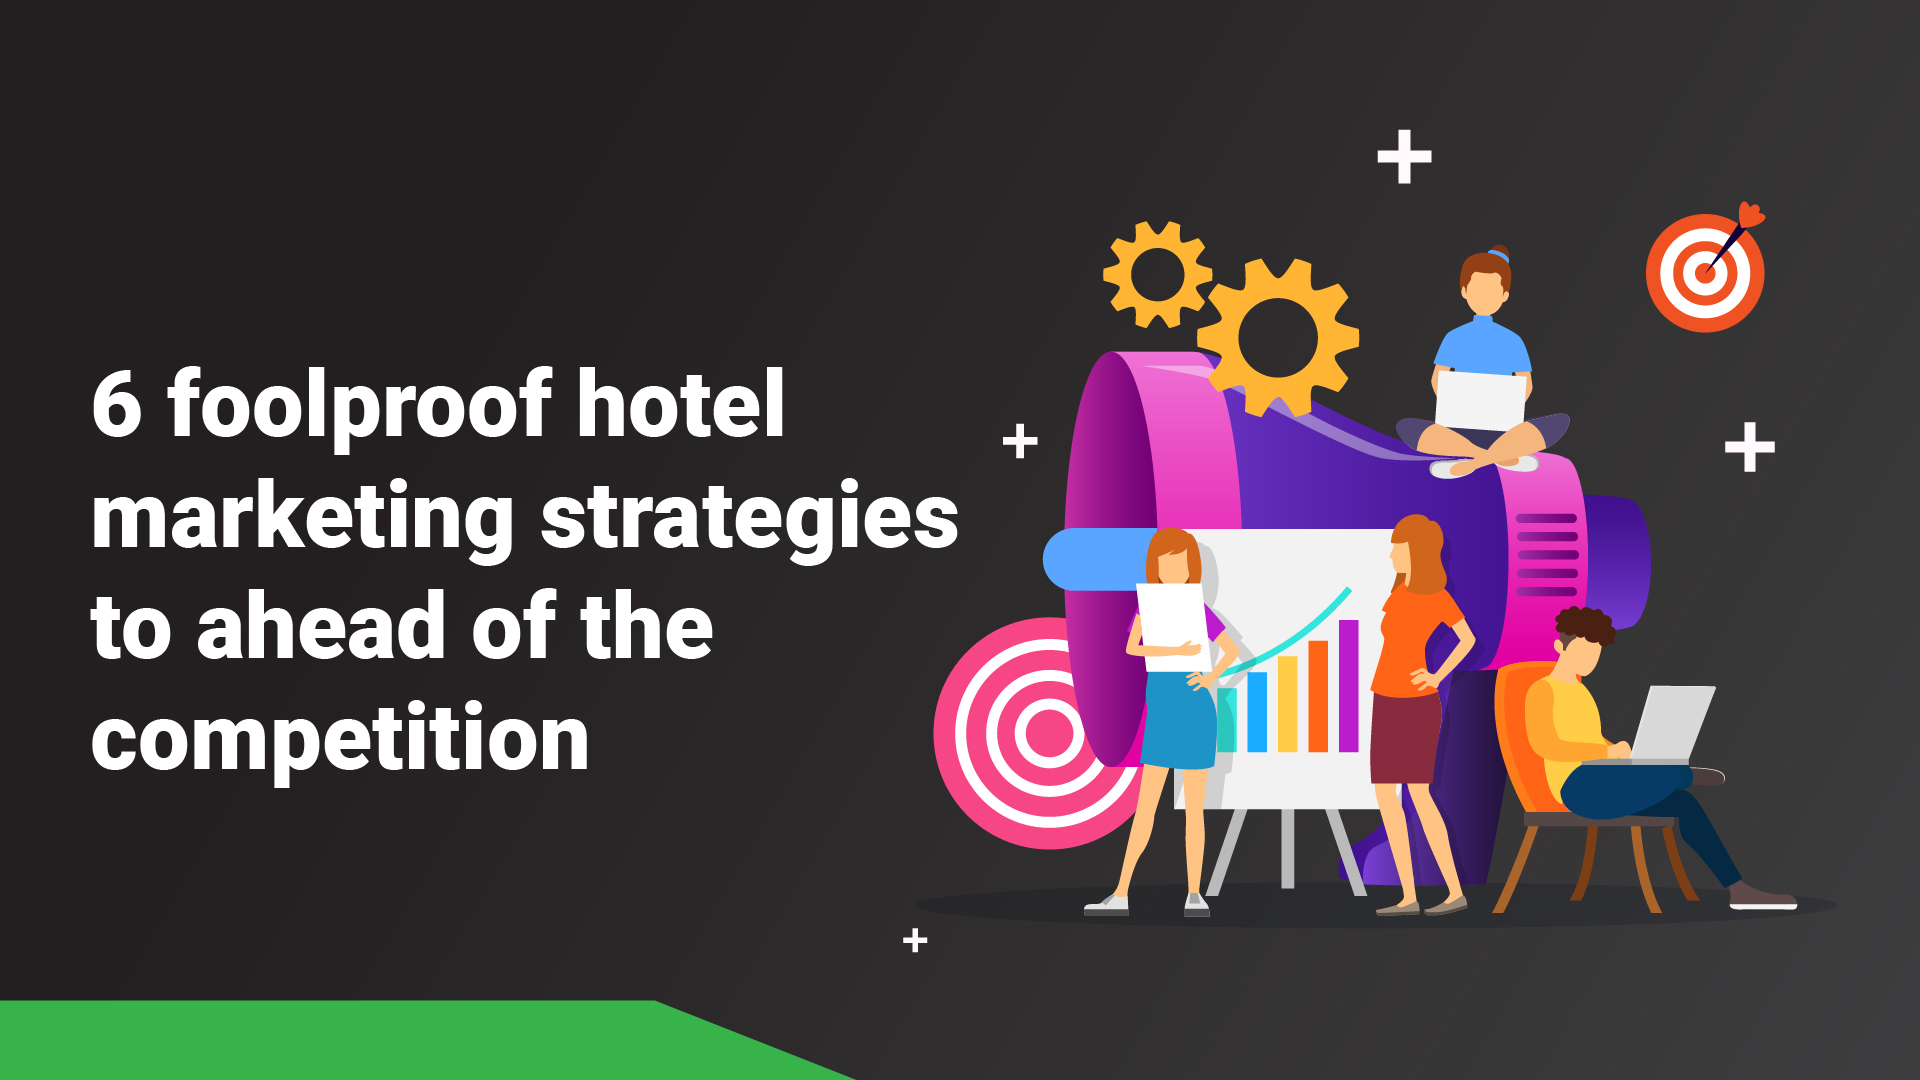 6 foolproof hotel marketing strategies to ahead of the competition